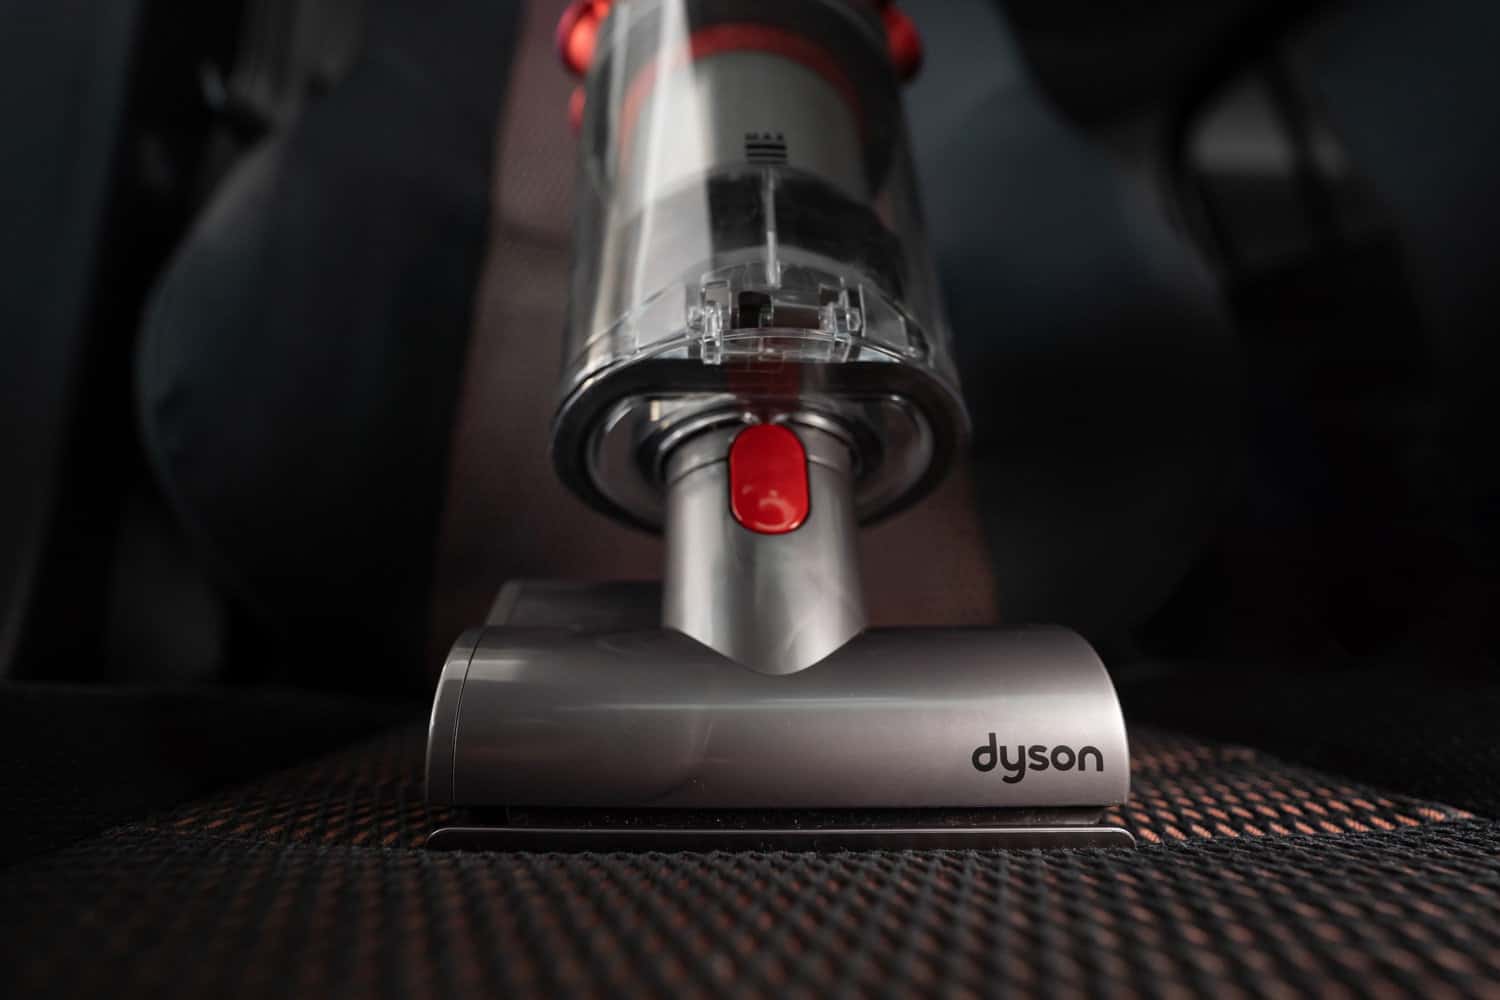 Close up of the Mini motorhead of Dyson Cyclone V10 Fluffy vacuum cleaner on car seats with car interior background. Ready for cleaning